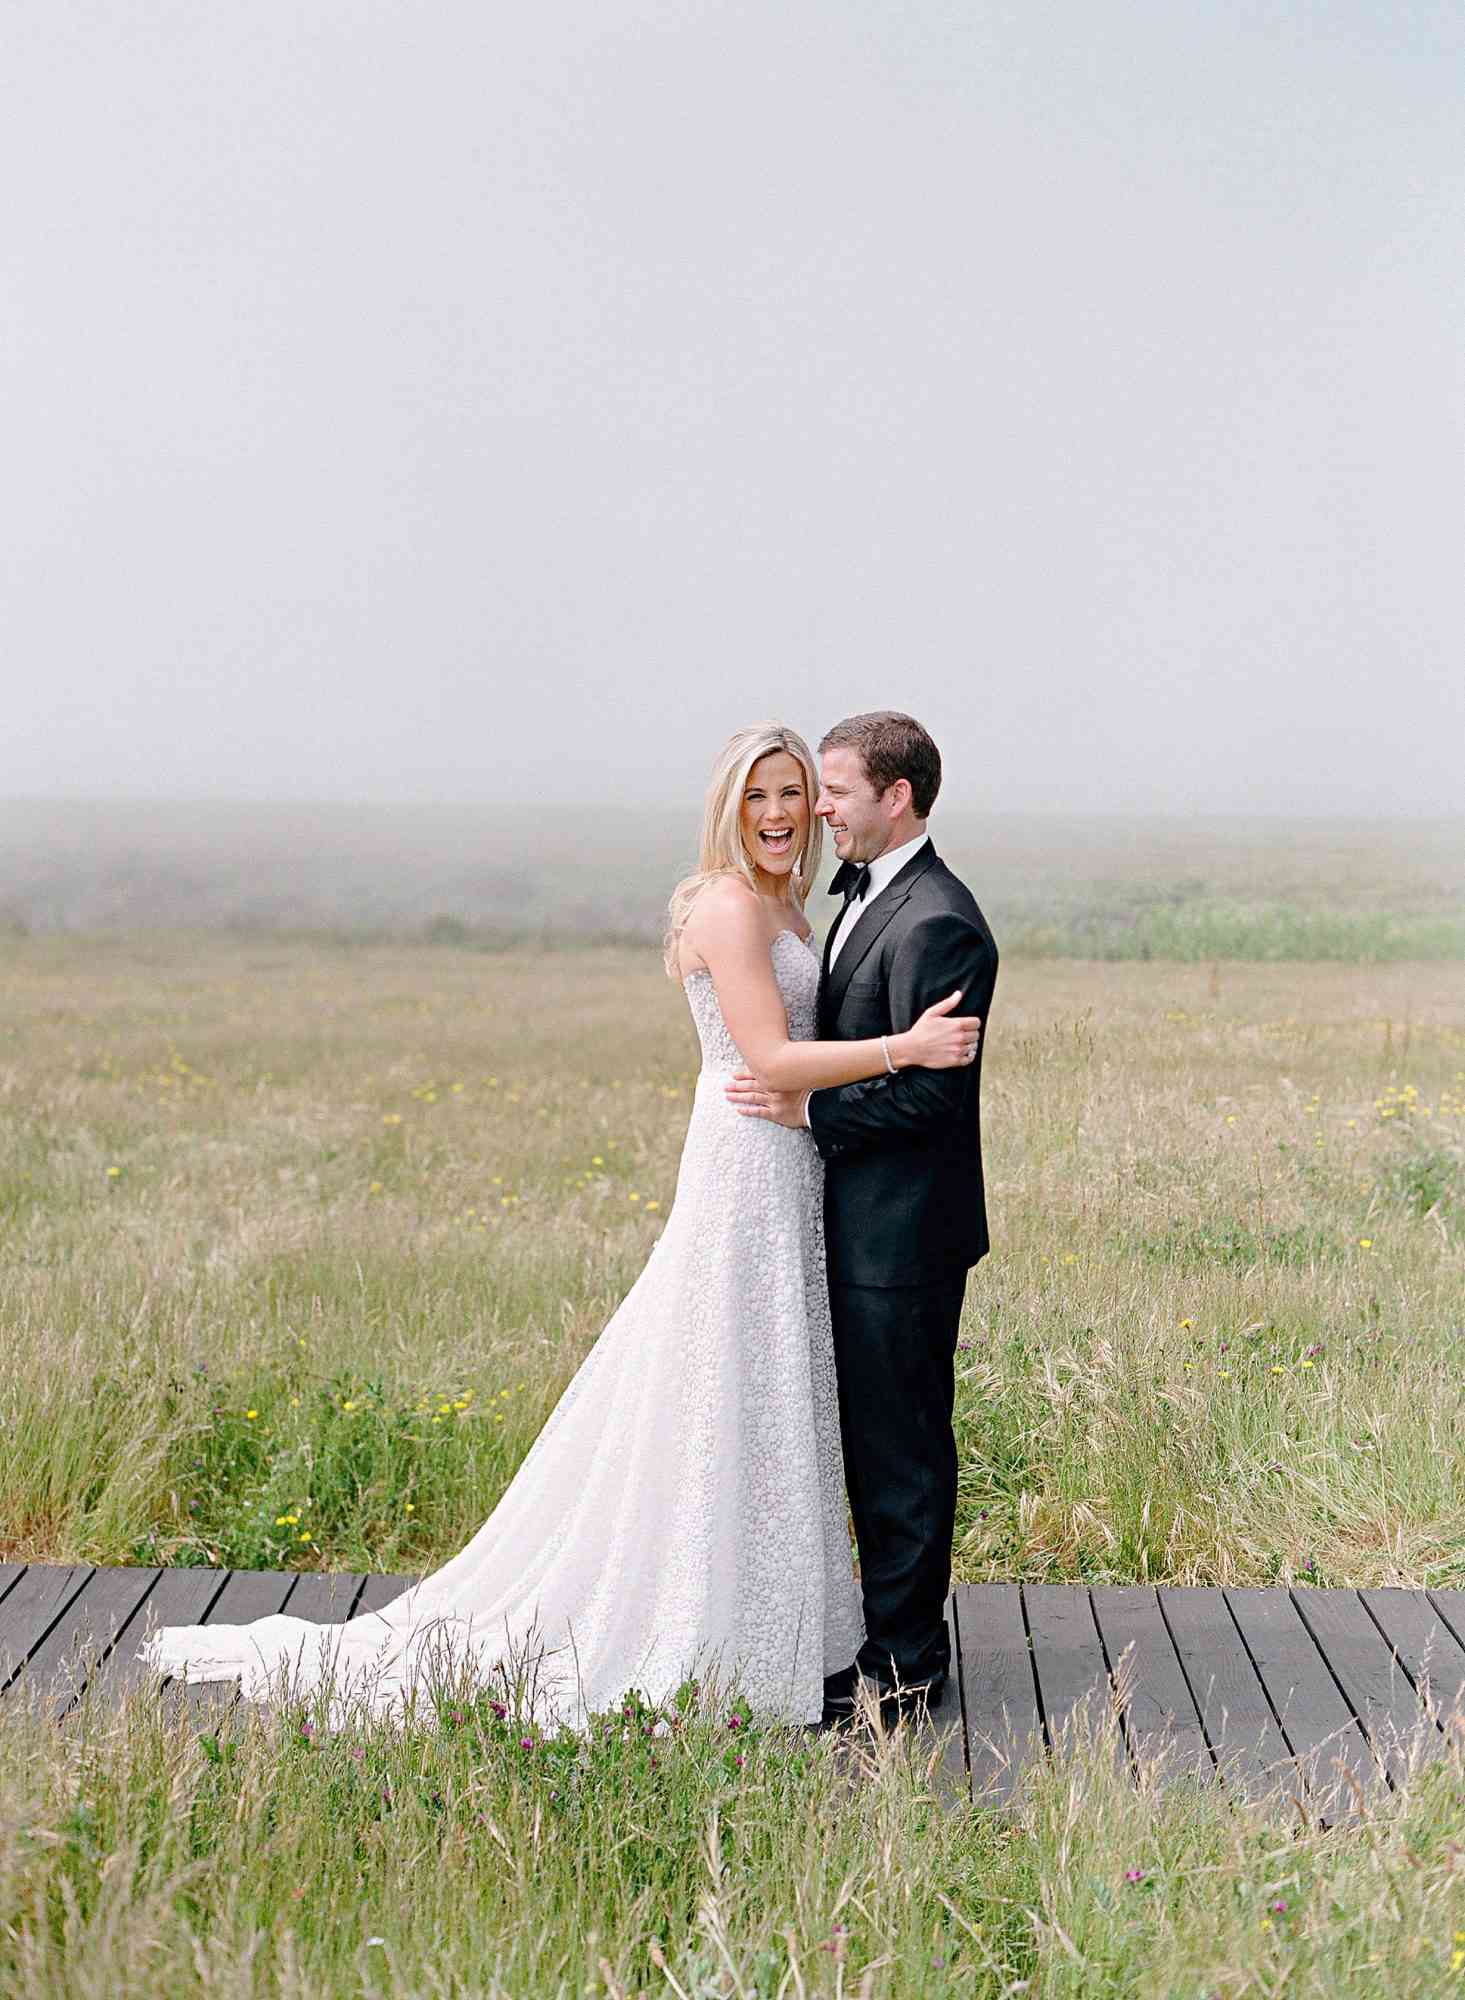 whitney zach wedding couple embracing in field bride laughing